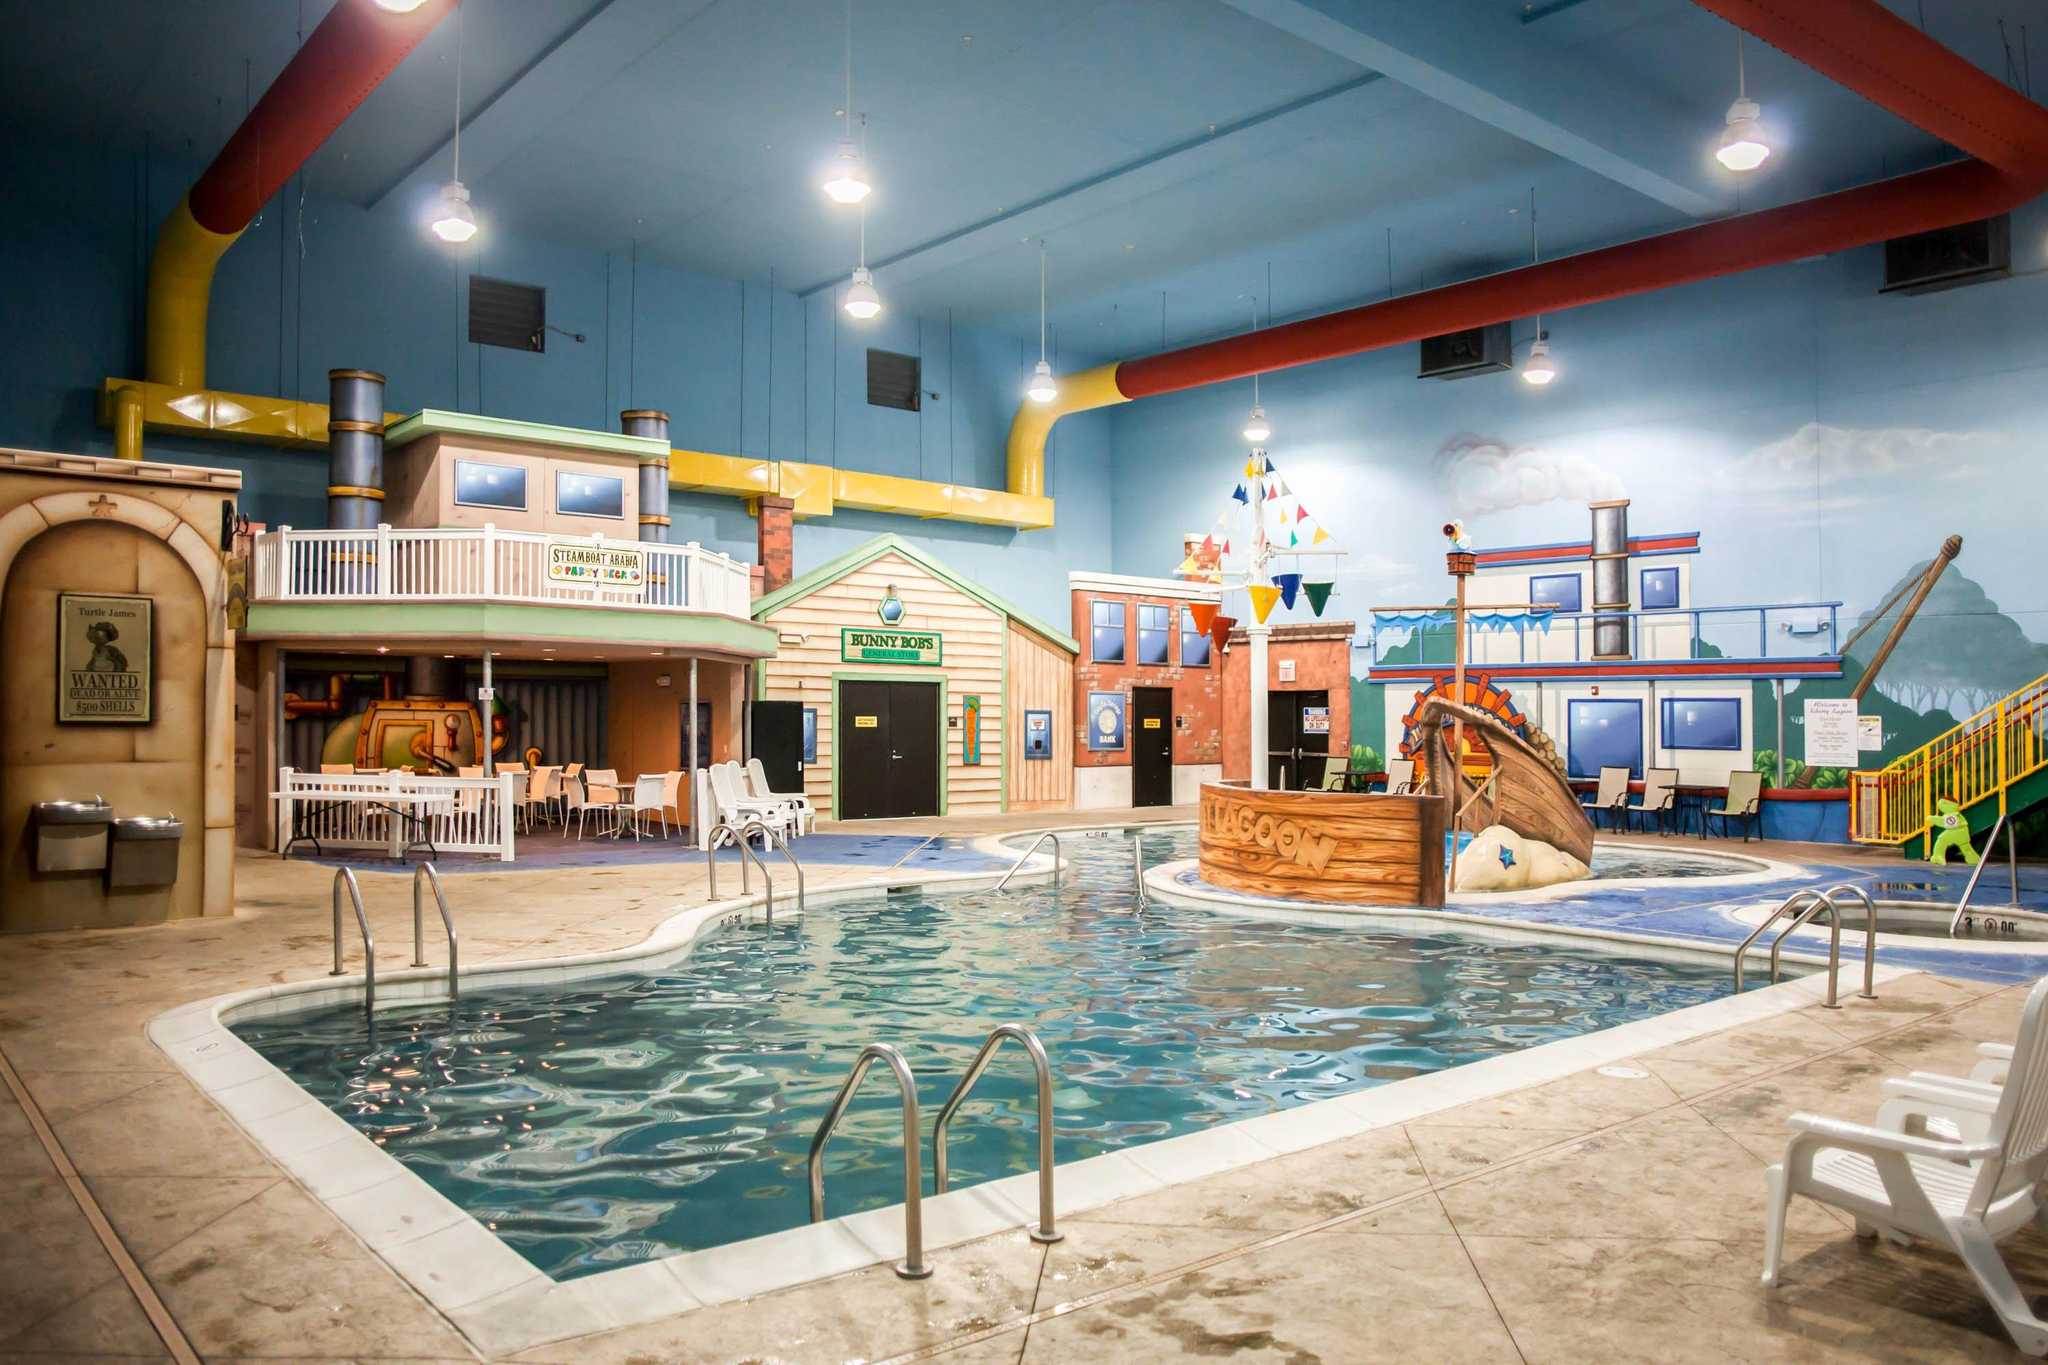 Sleep Inn & Suites Indoor Waterpark Coupons near me in Liberty | 8coupons